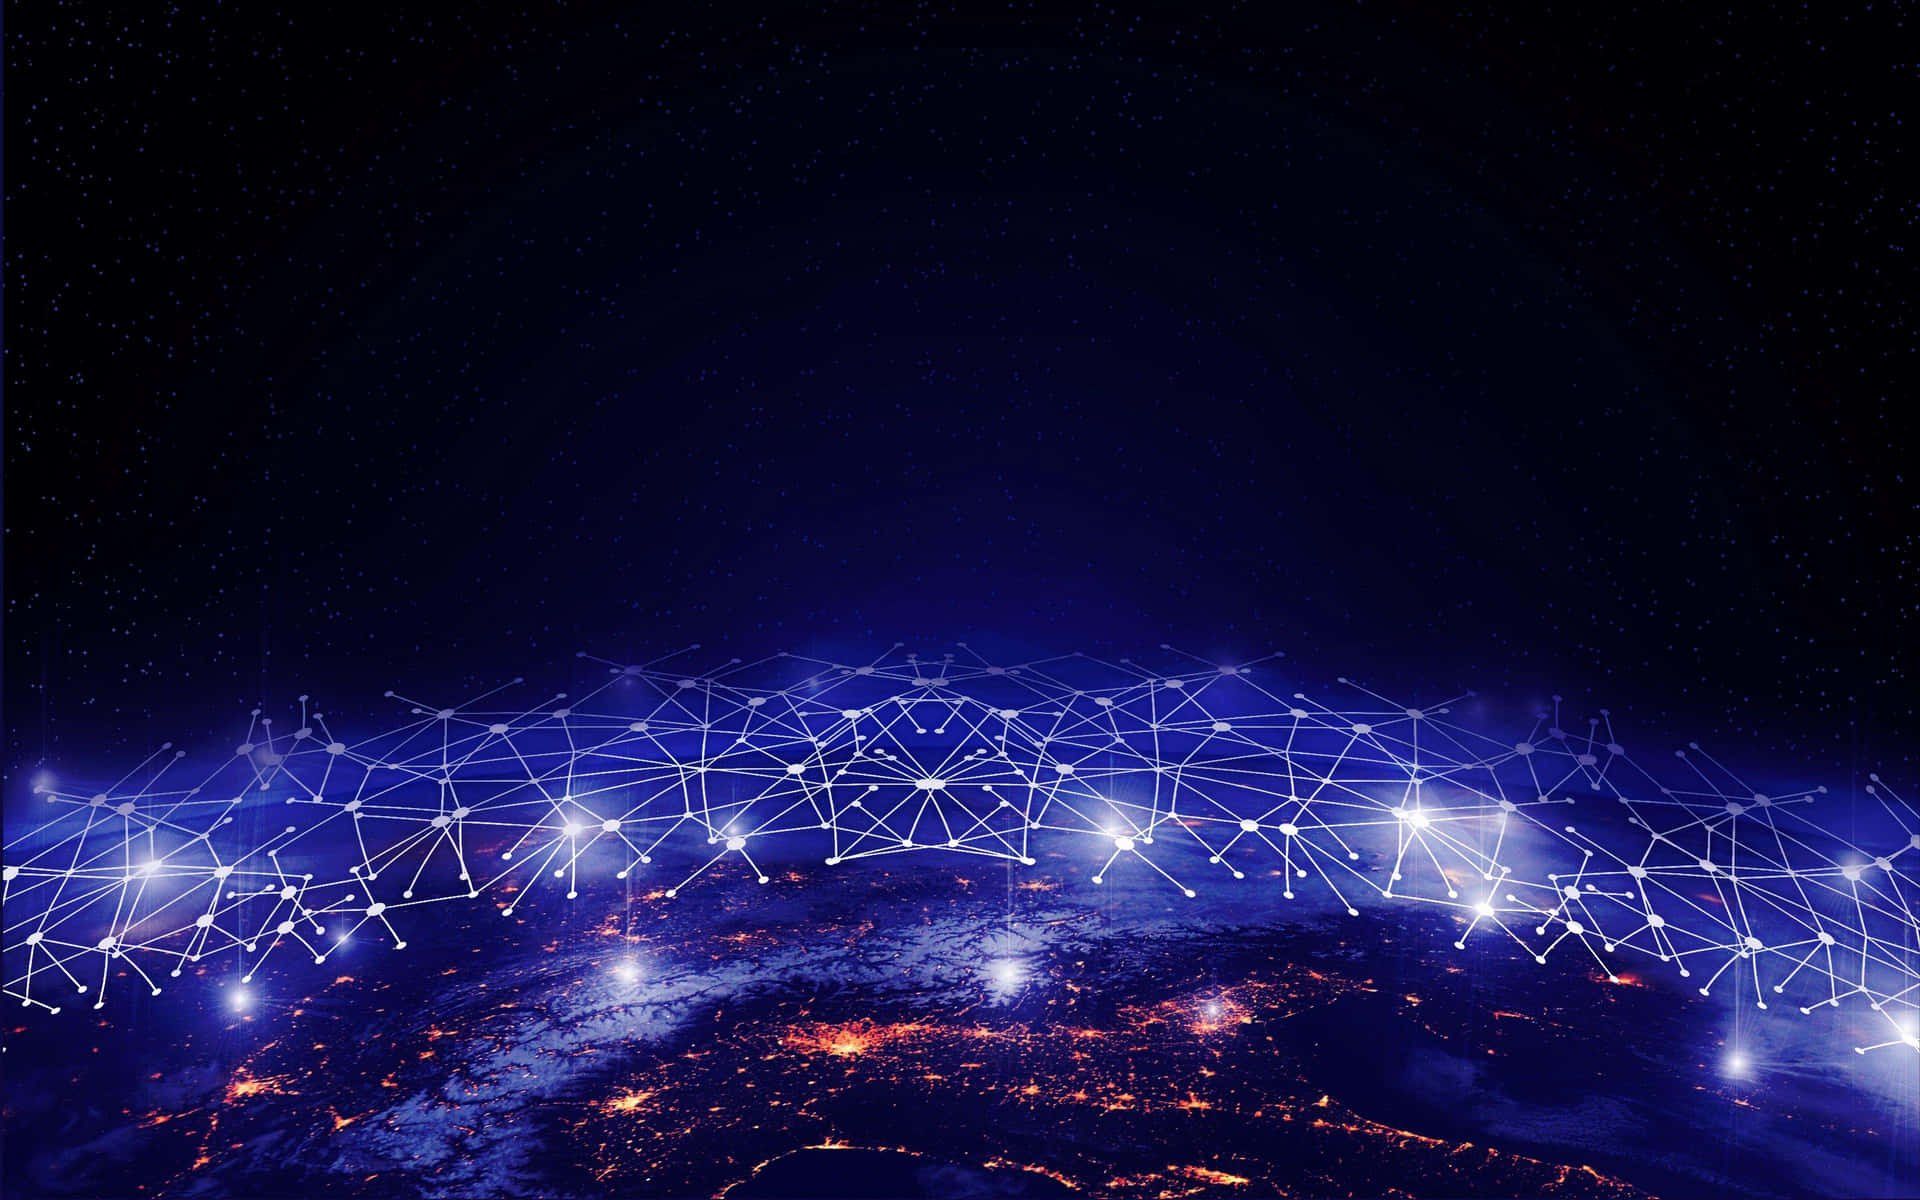 Global Network Connectivity Concept Wallpaper